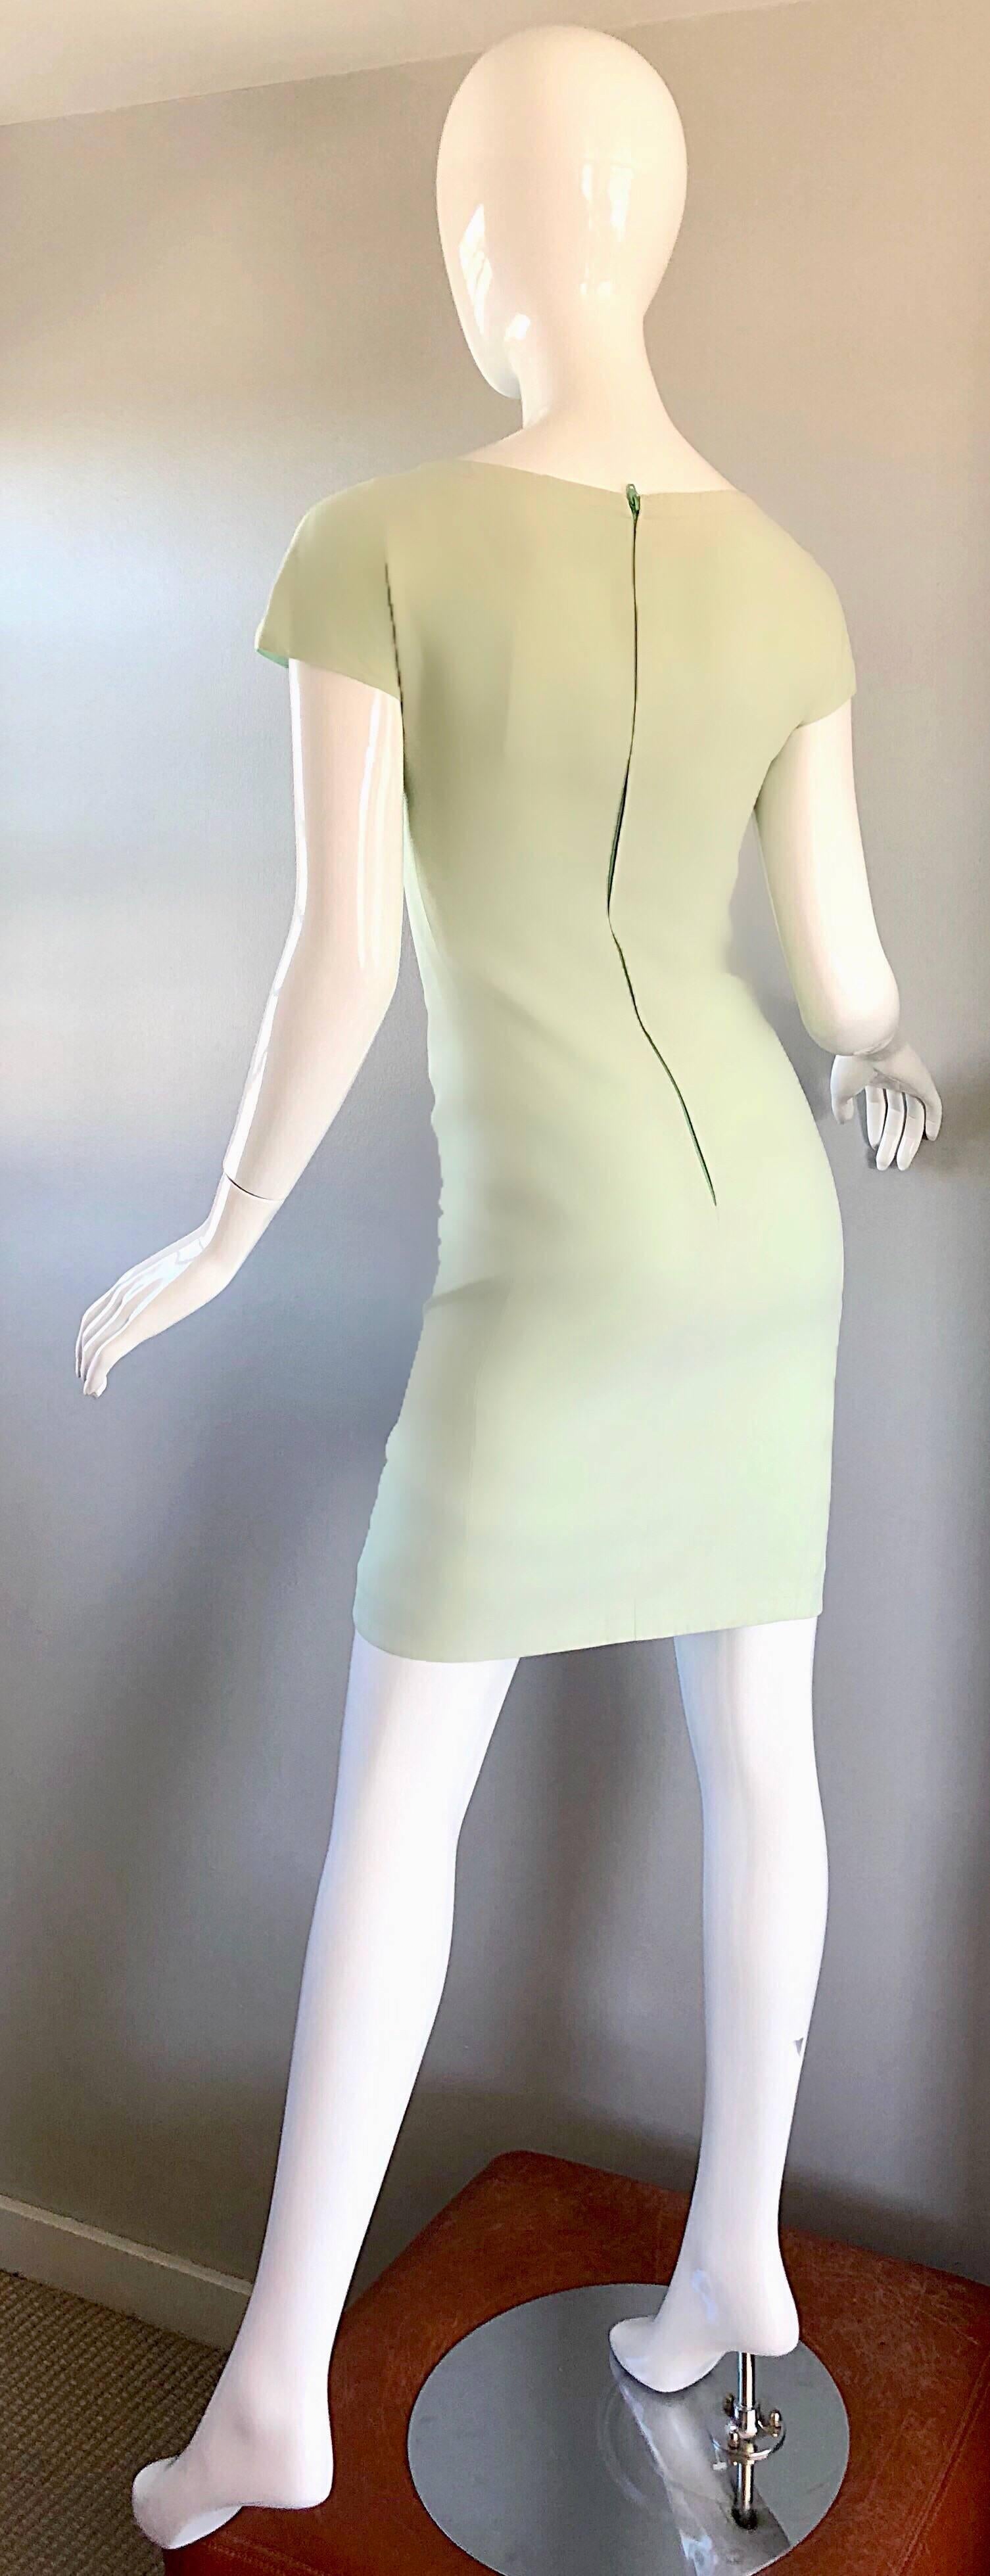 Women's Gianni Versace for Genny New 1990s Pale Mint Green Size 6 Bodycon 90s Dress